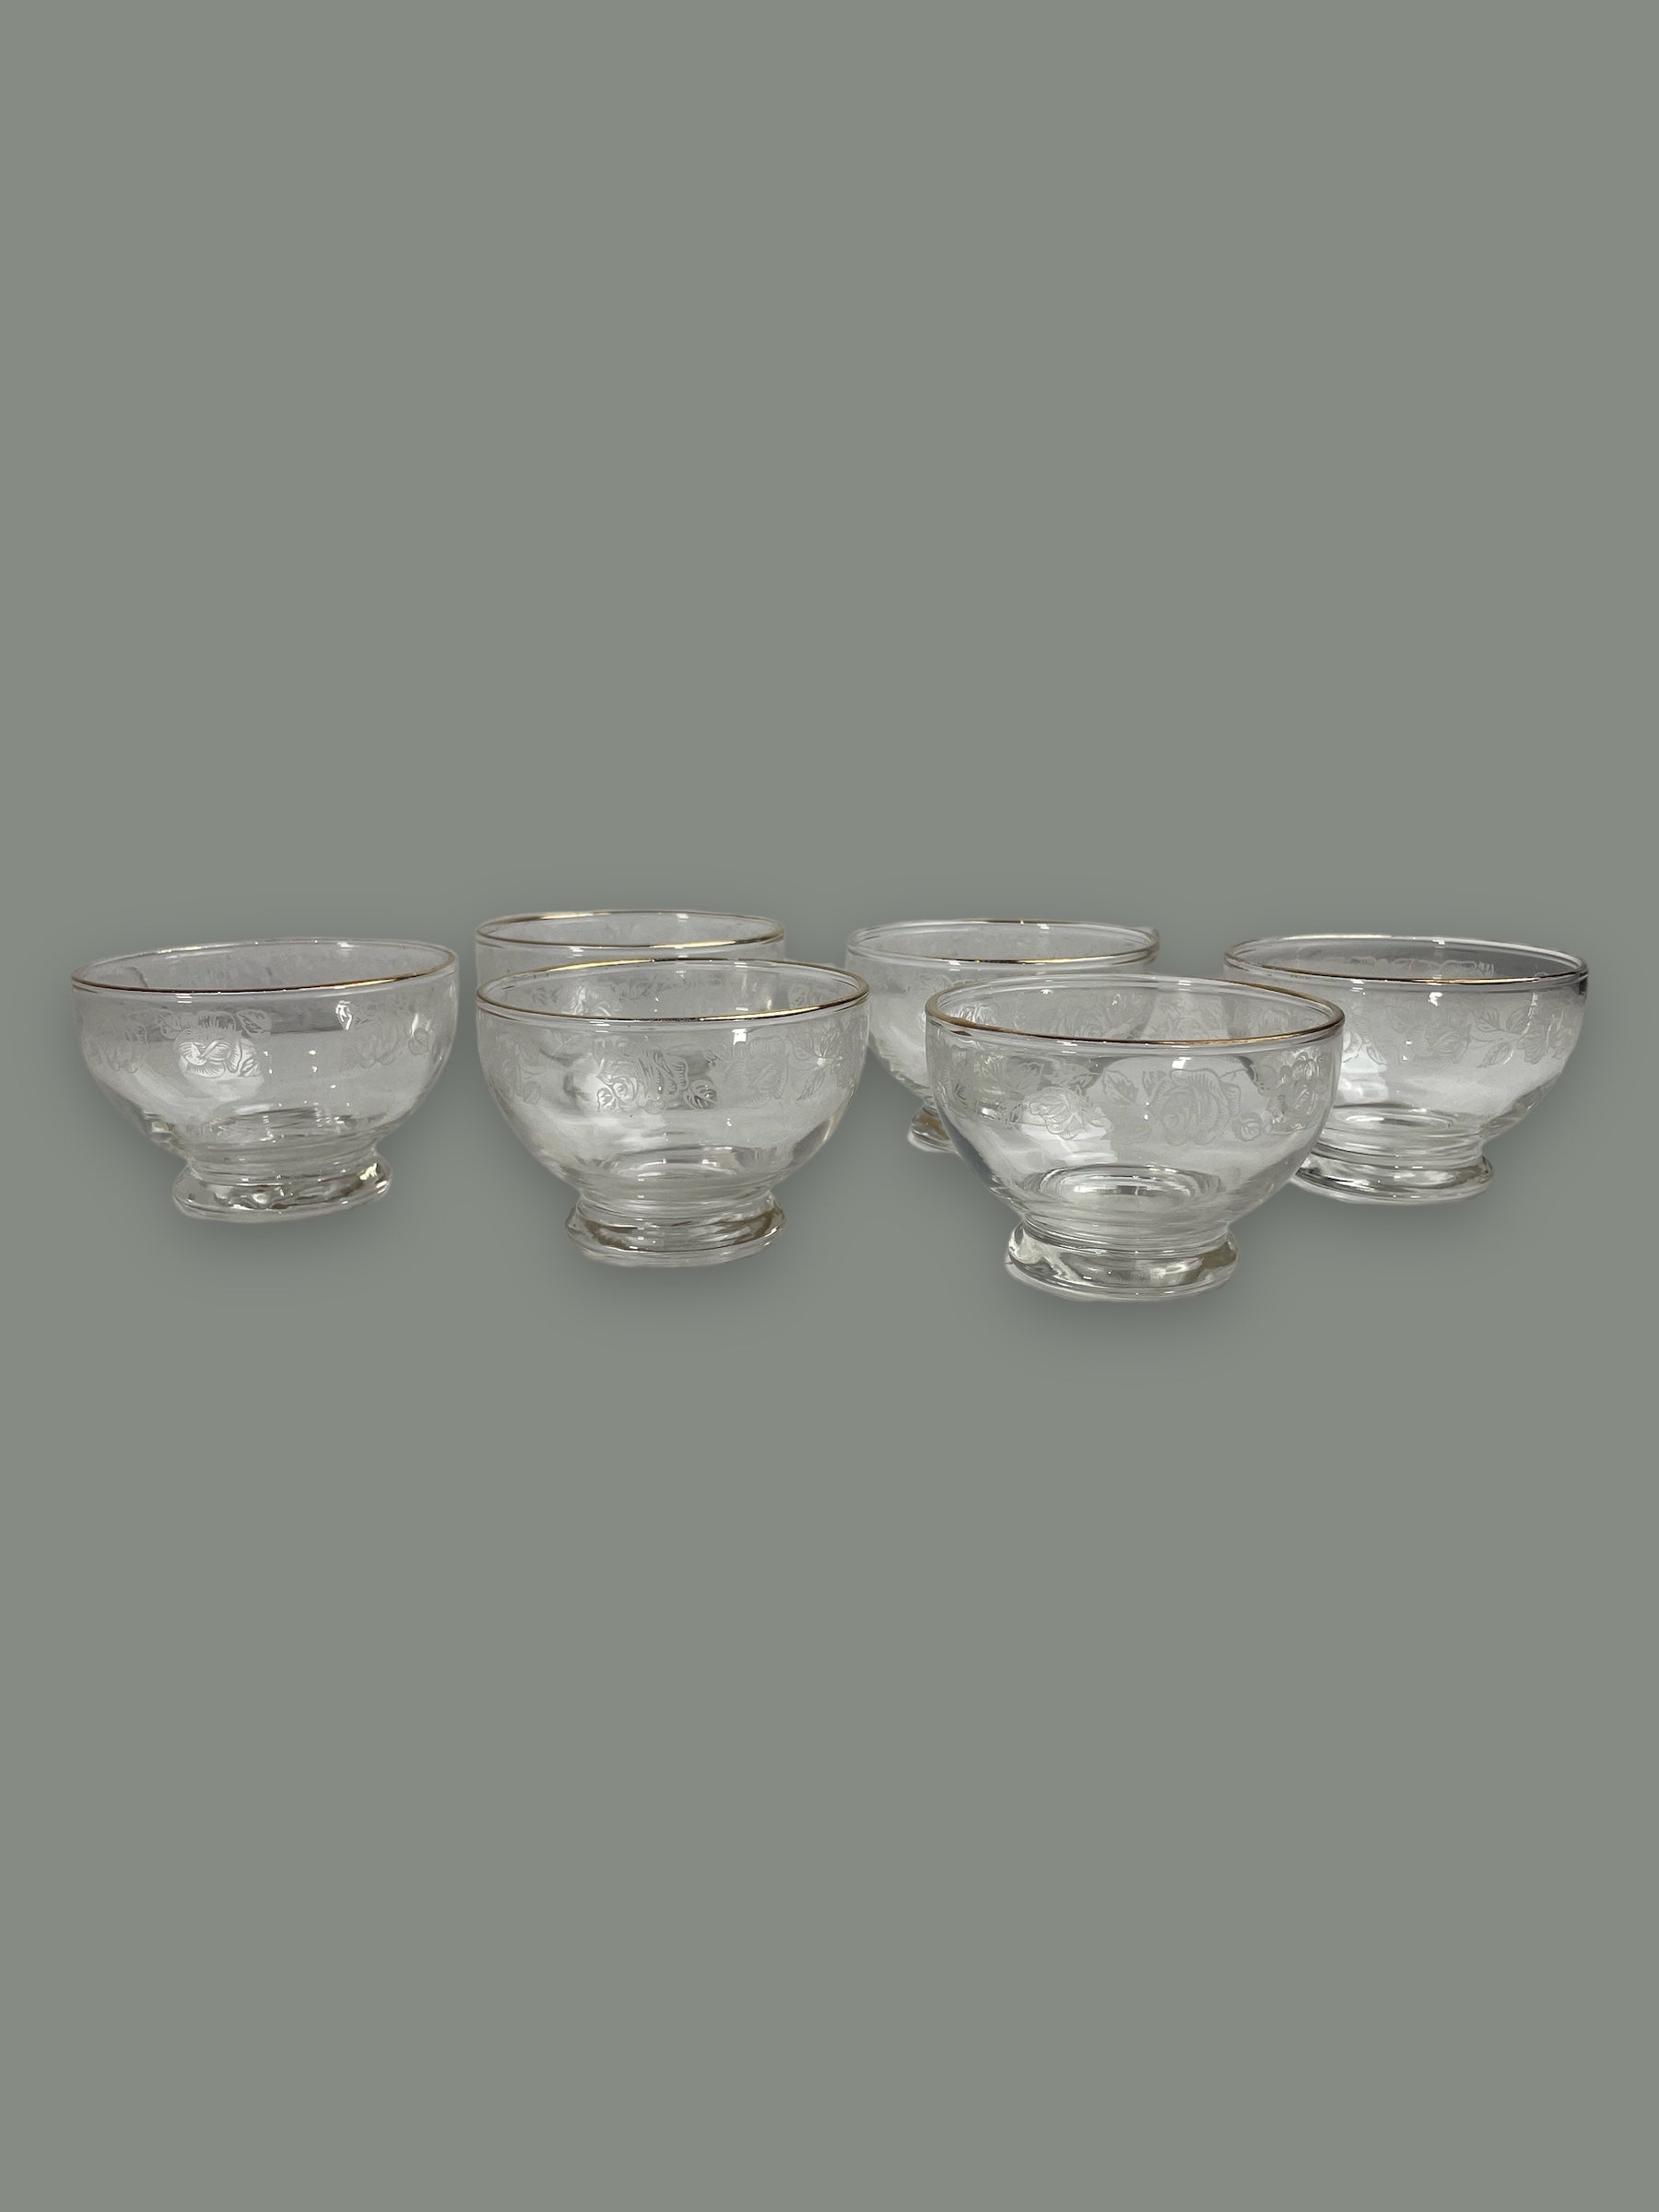 Set of 6 Dominion Glass Fruit Sherbet Cups in the Roses Pattern